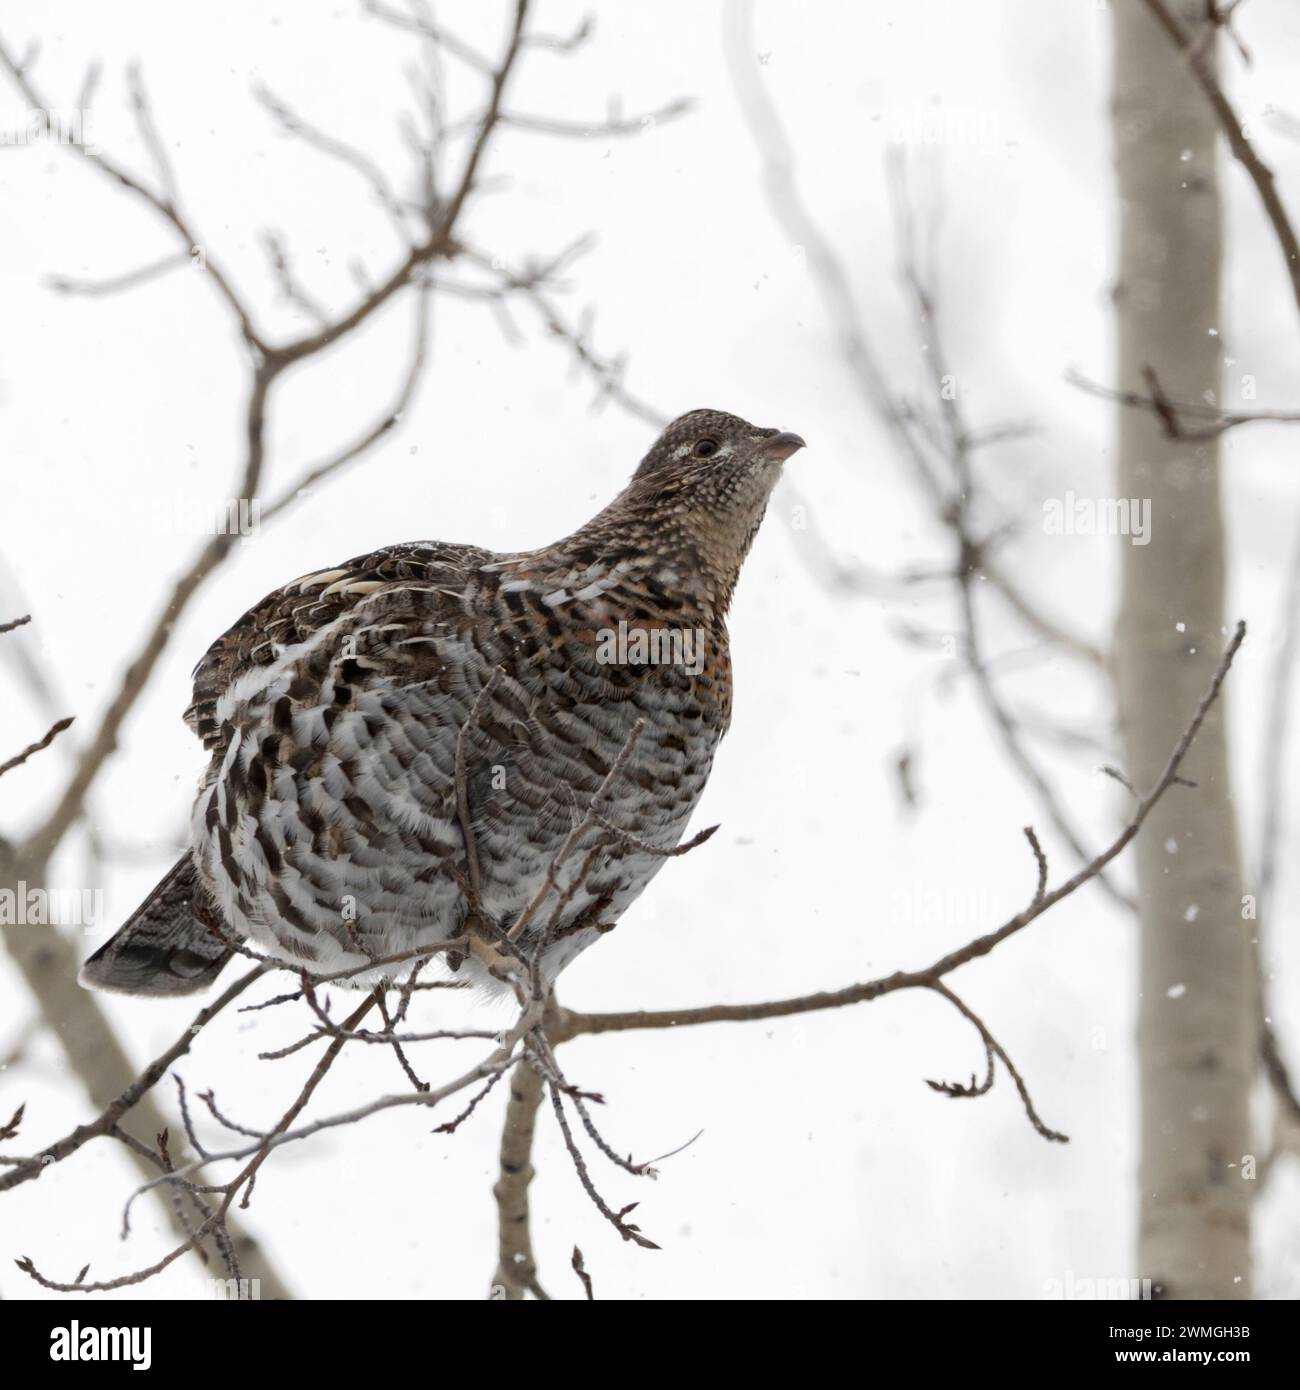 Ruffed Grouse ( Bonasa umbellus ) in winter, perched in a tree, sitting on a thin branch, searching for food, during light snowfall, Wyoming, USA. Stock Photo